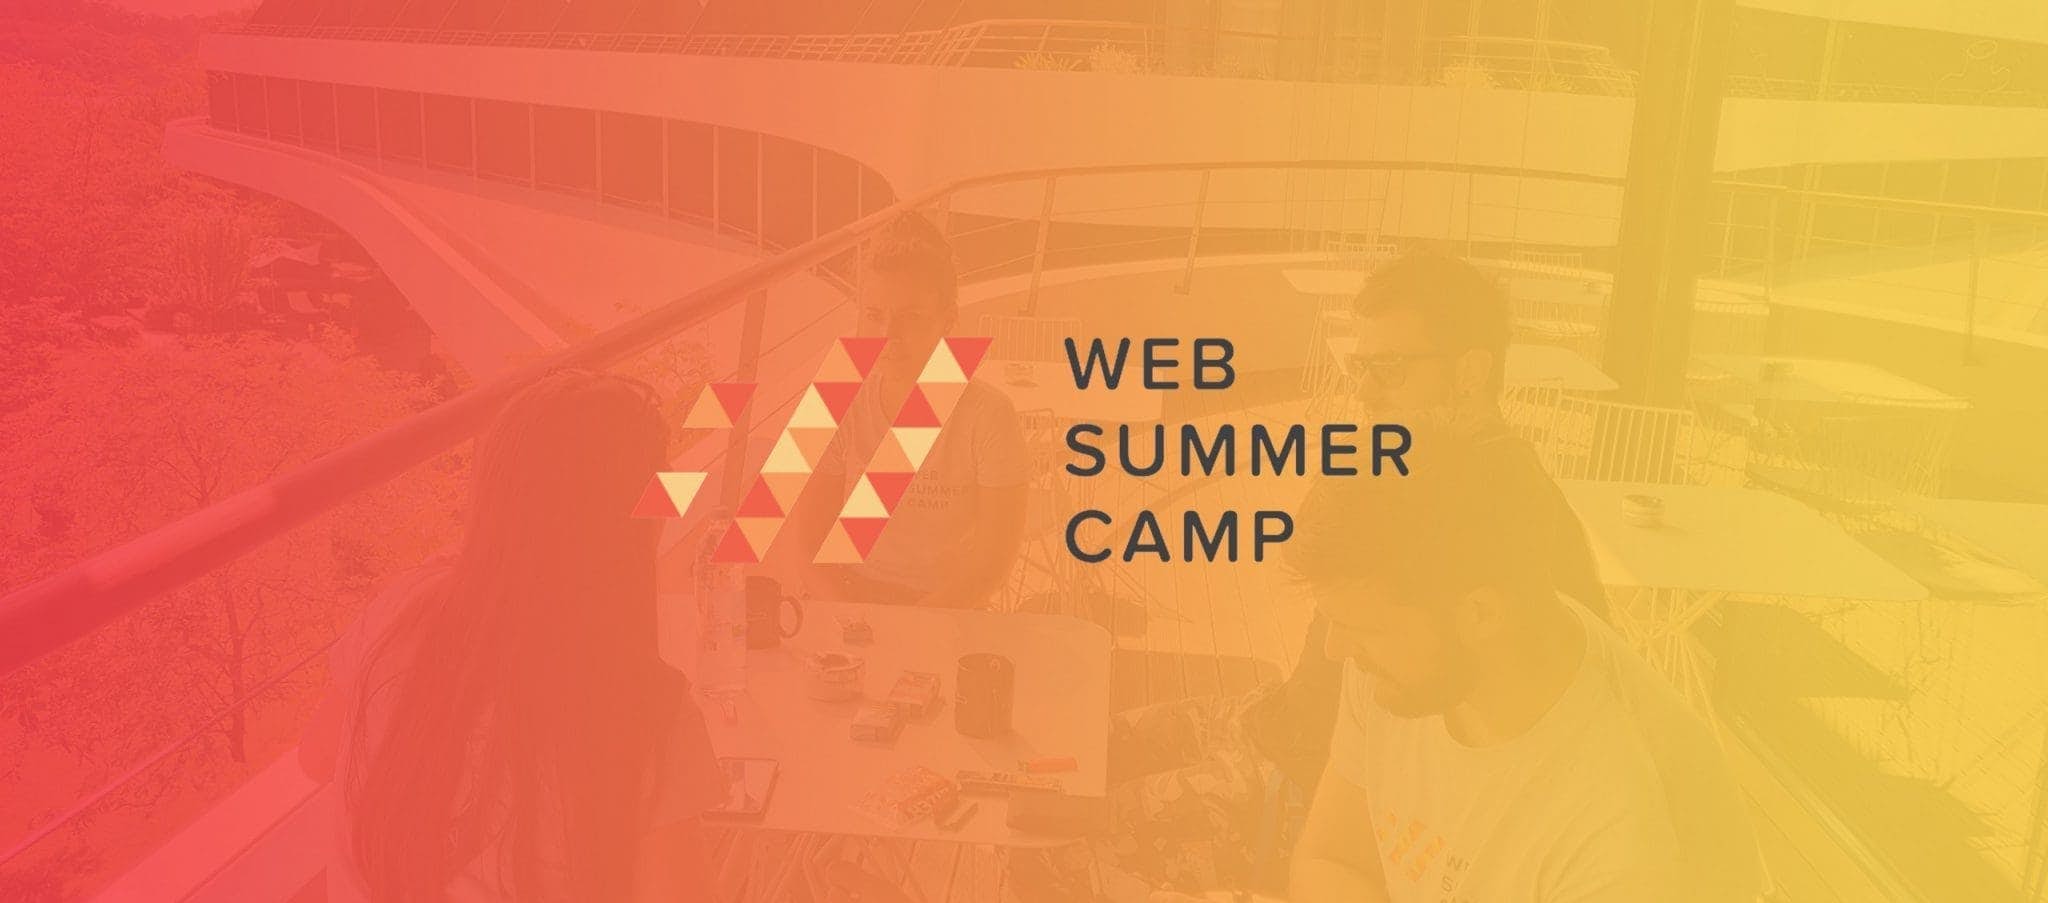 what-makes-web-summer-camp-special